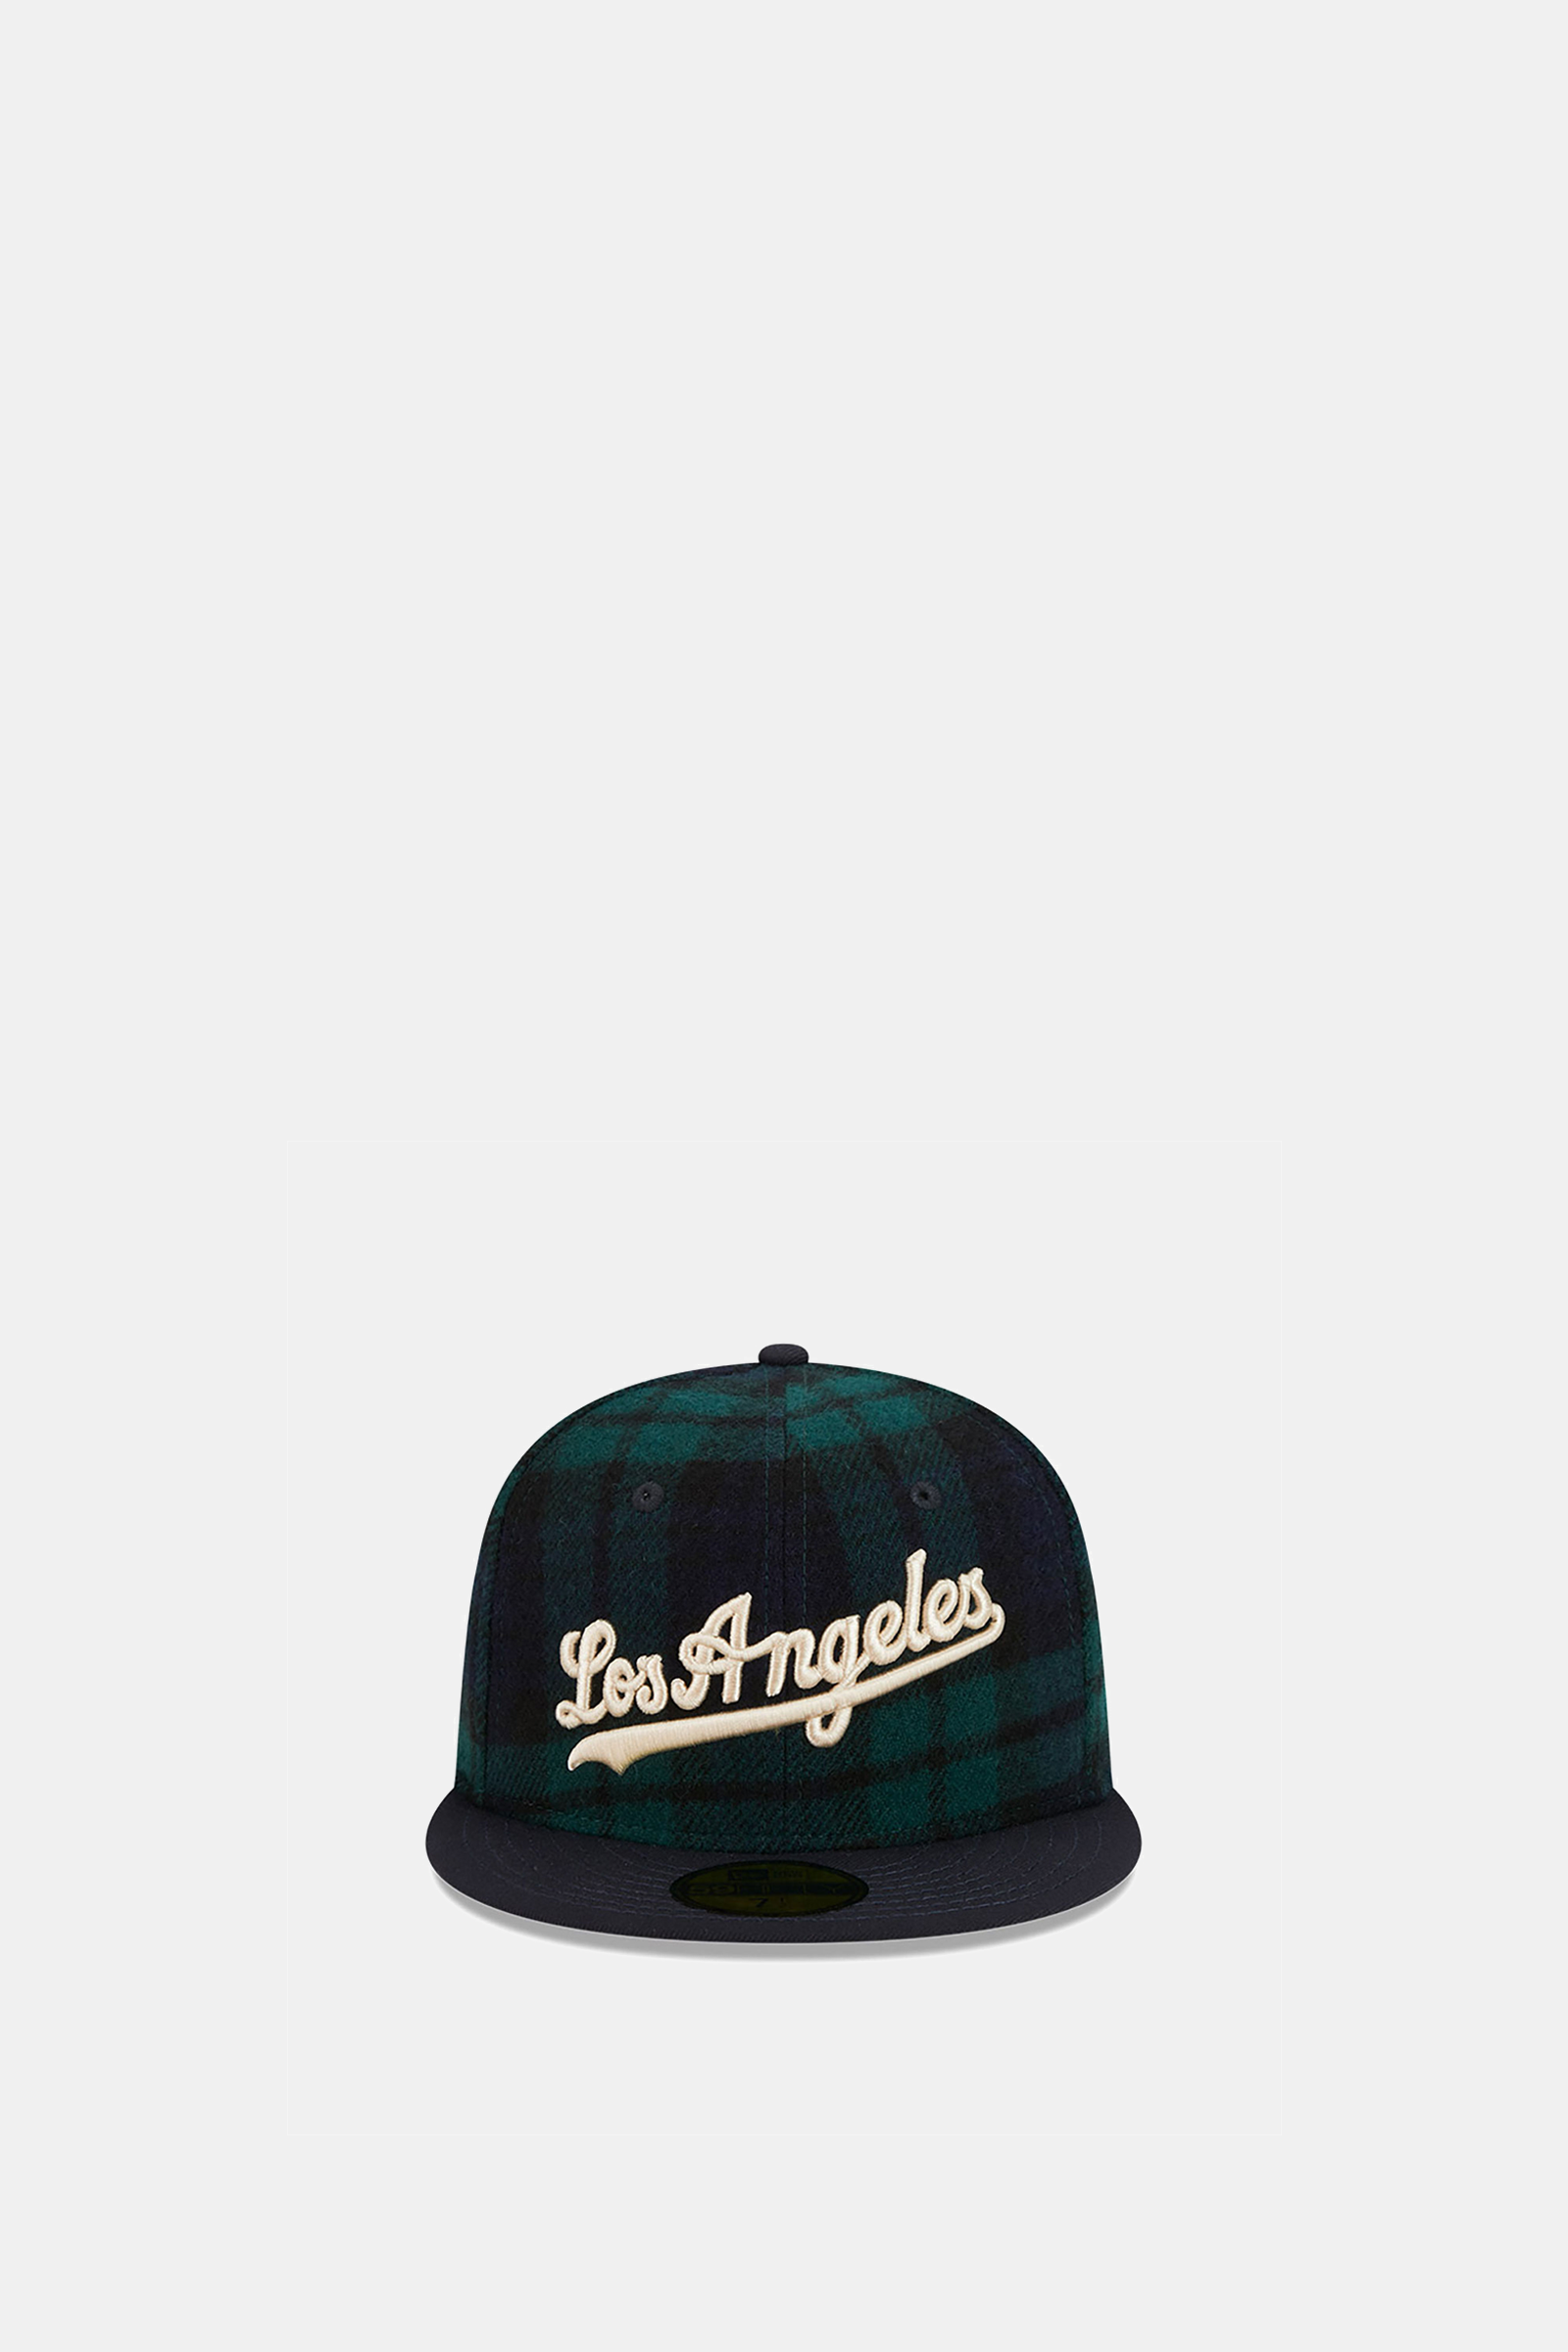 LOS ANGELES DODGERS BLACK WATCH 59FIFTY FITTED CAP